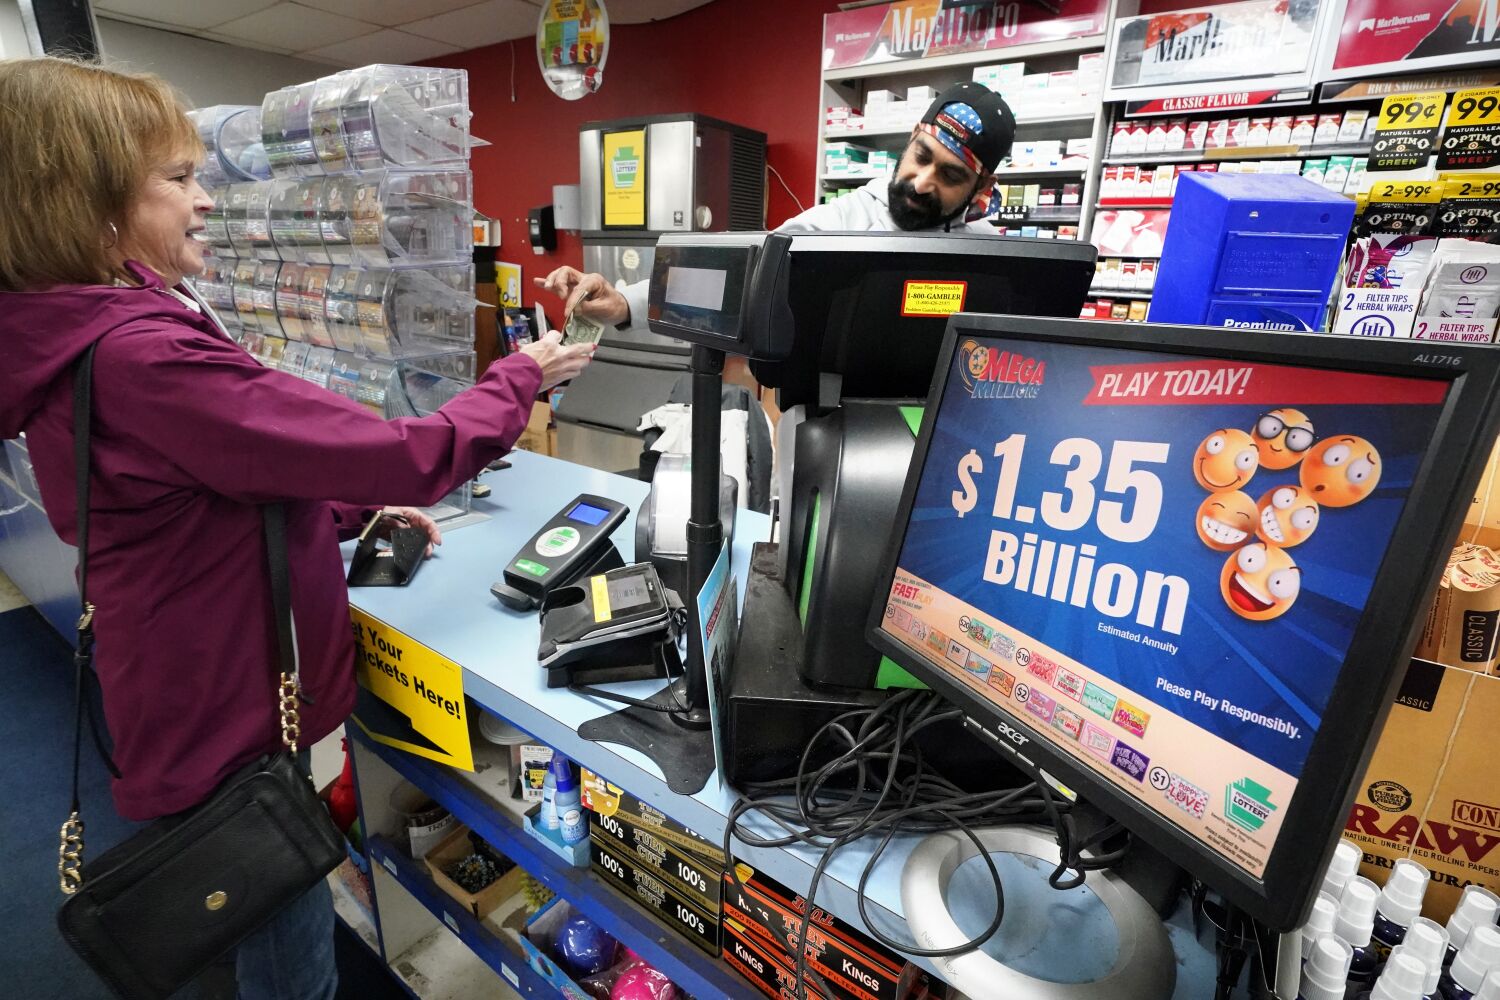 With a $1.35-billion jackpot, Friday the 13th could be lucky day for Mega Millions players